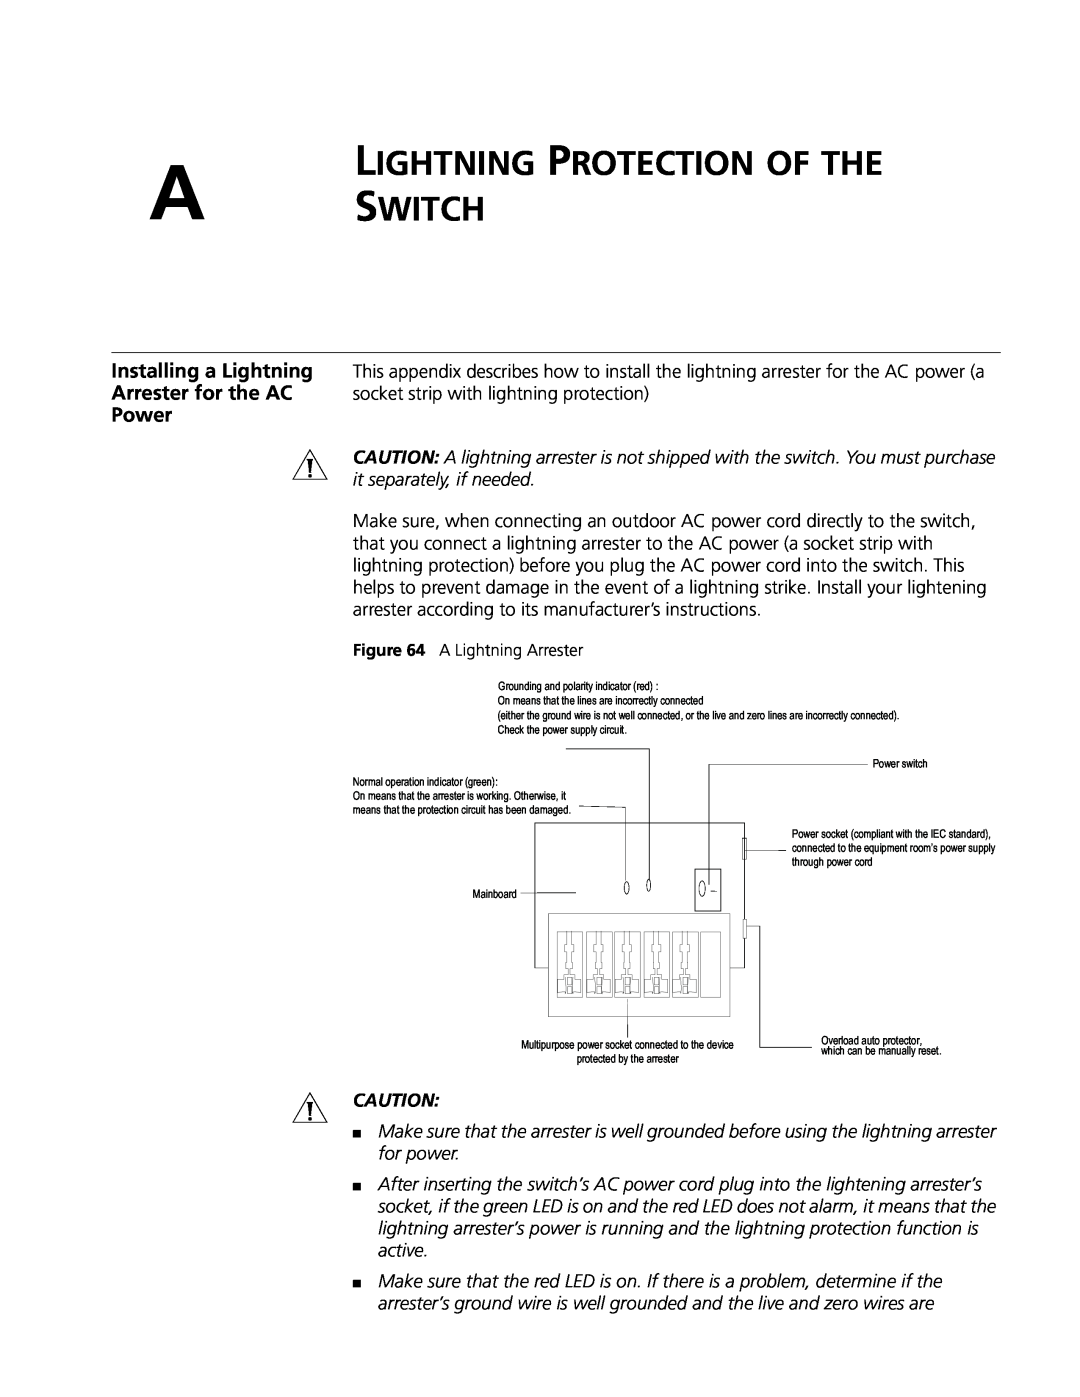 3Com 8814, 8807, 8810 manual Lightning Protection Of The A Switch, Power, c CAUTION 